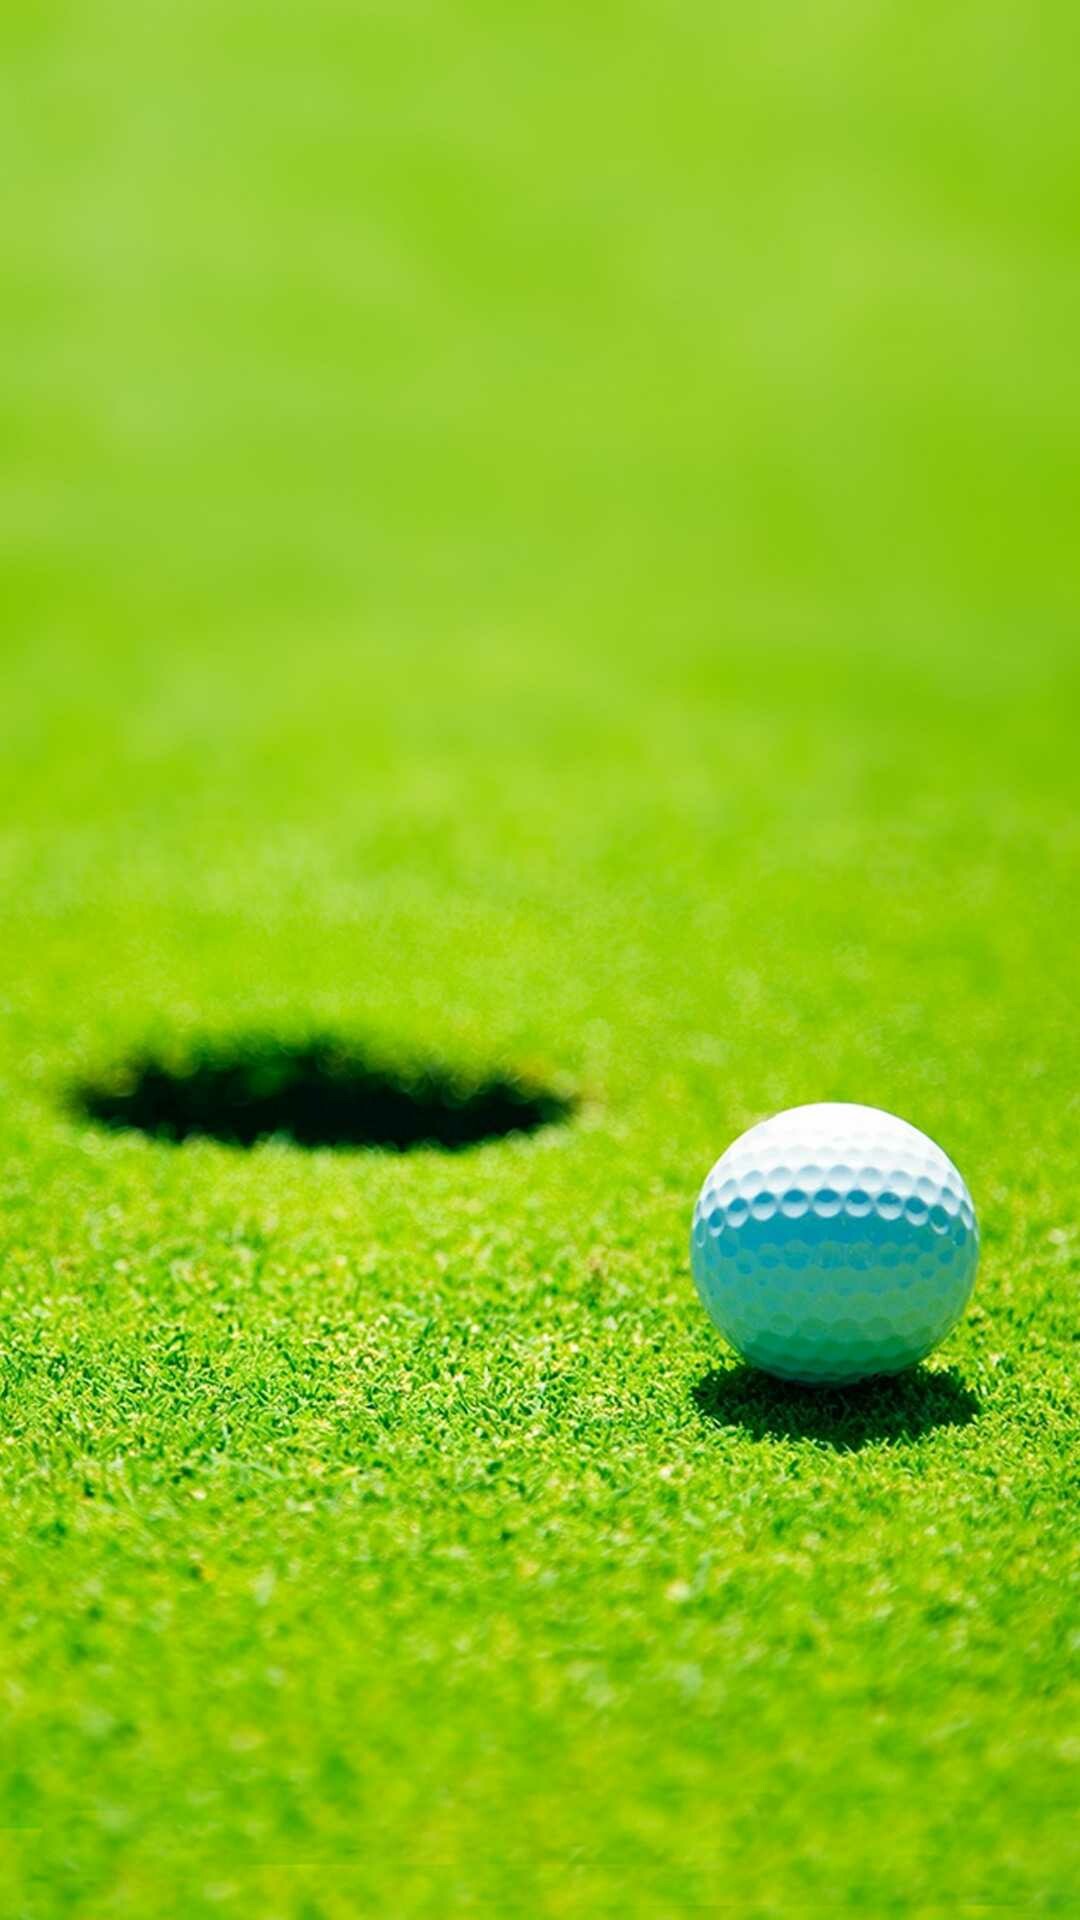 Golf: Golf ball, subject to testing and approval by The R&A. 1080x1920 Full HD Wallpaper.